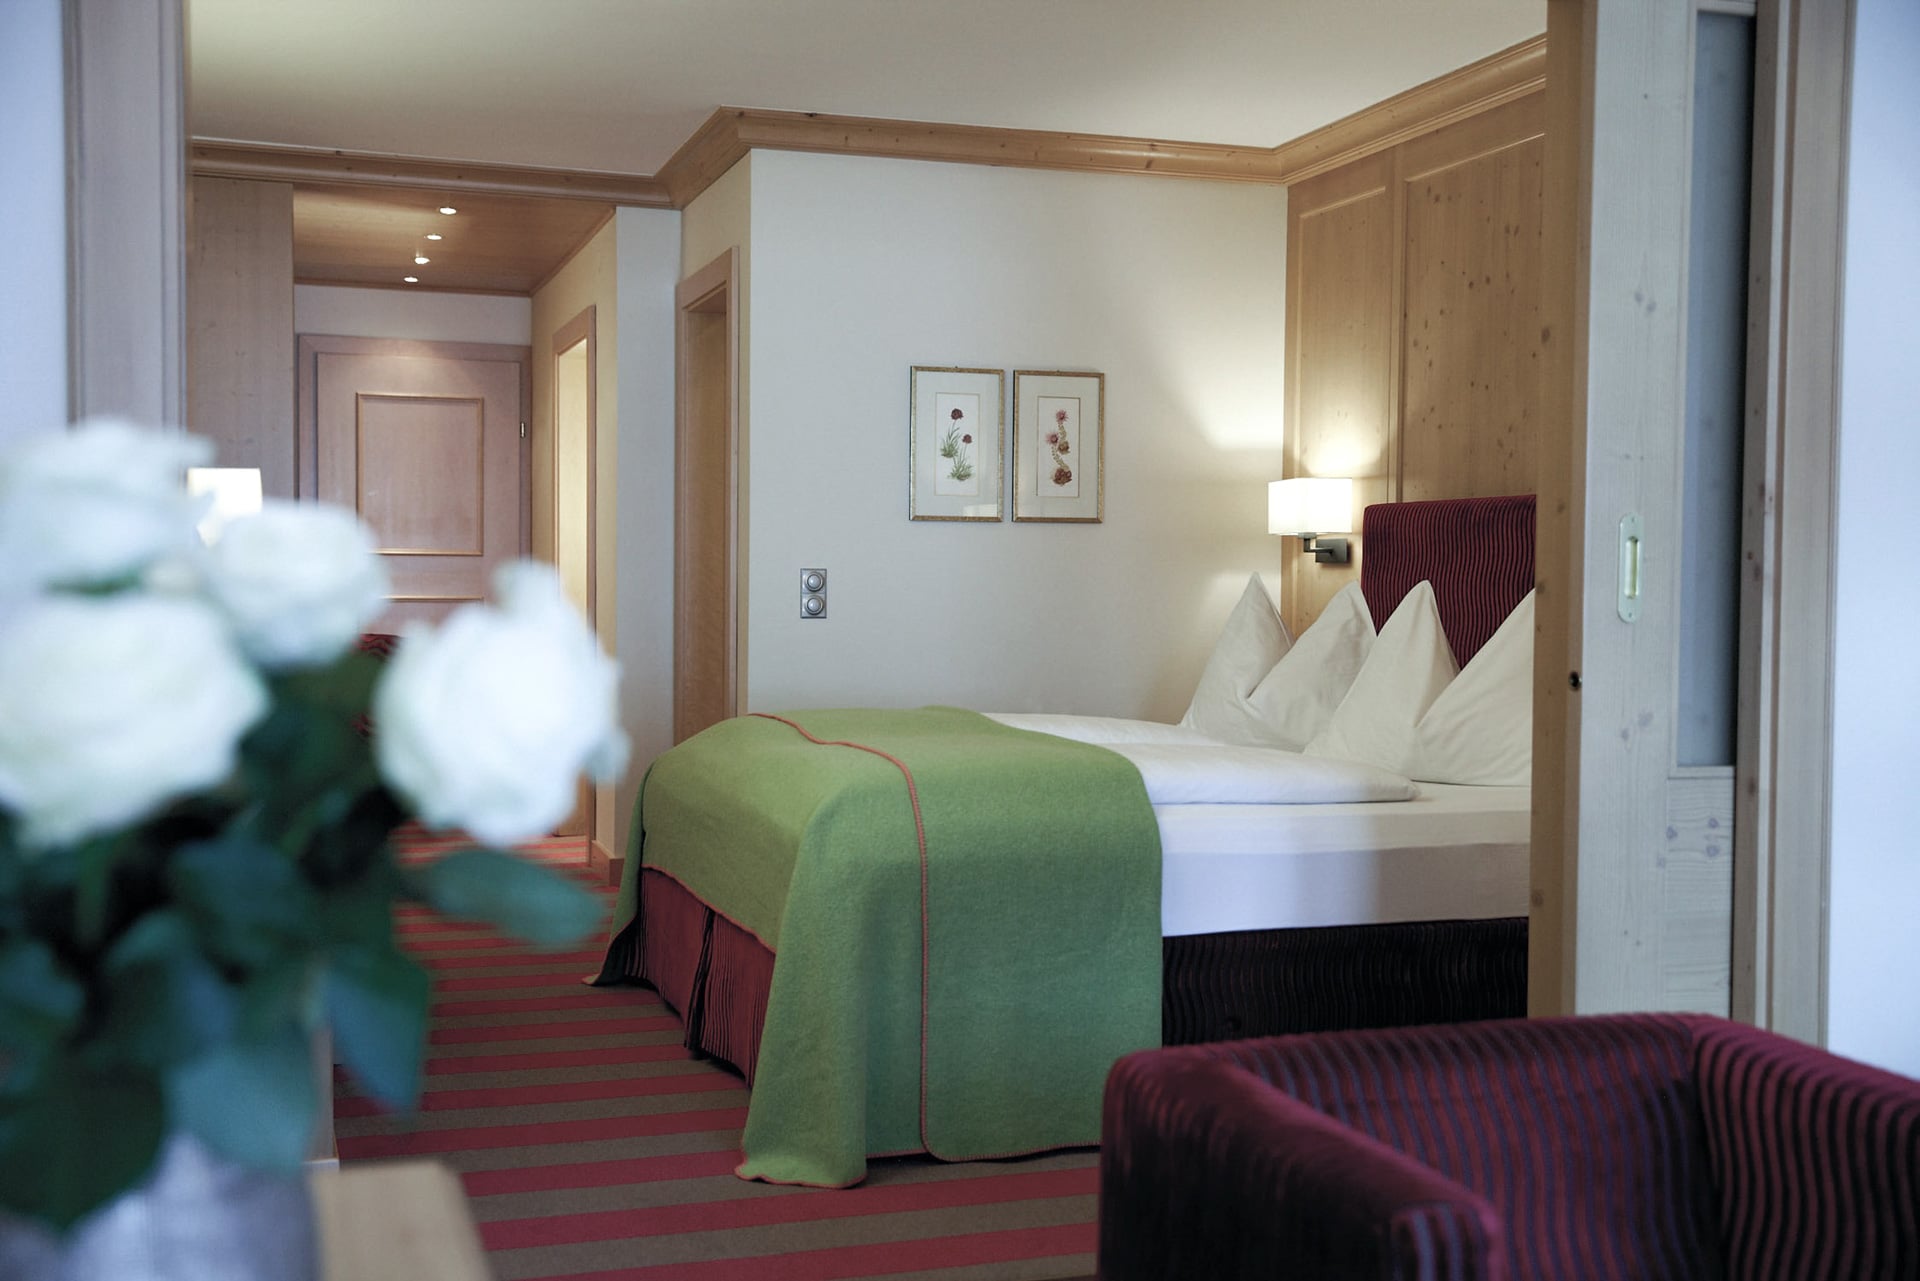 A tranquil and neatly arranged hotel room with warm wooden finishes, soft lighting, and a welcoming bed adorned with a green bedspread and red accents, portraying an inviting atmosphere for rest and relaxation.